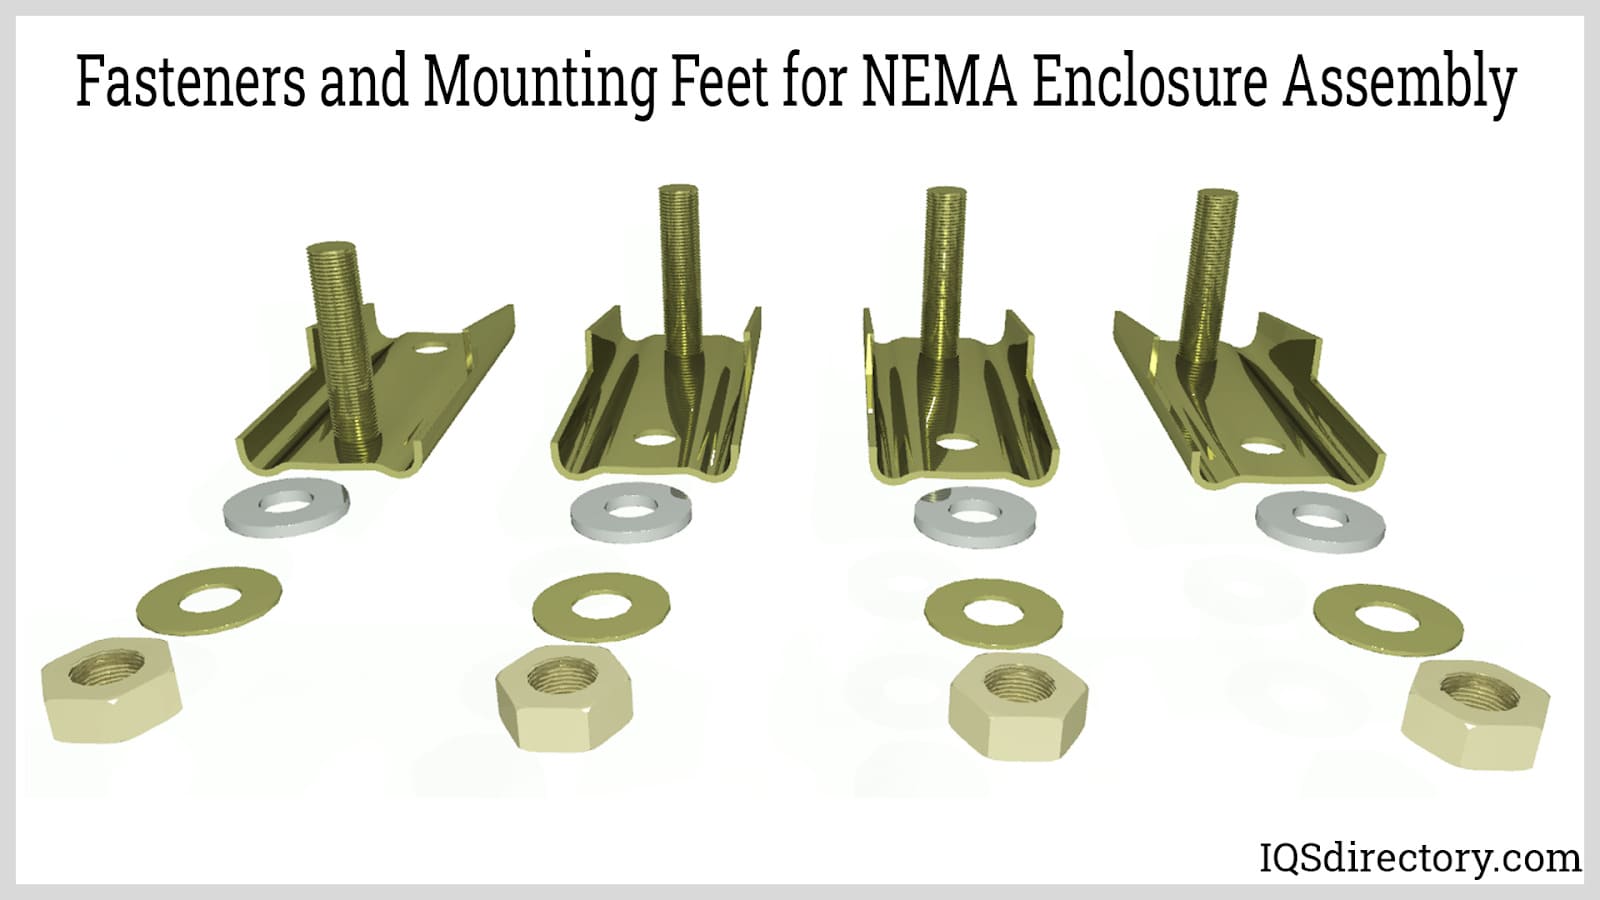 Fasteners and Mounting Feet for NEMA Enclosure Assembly